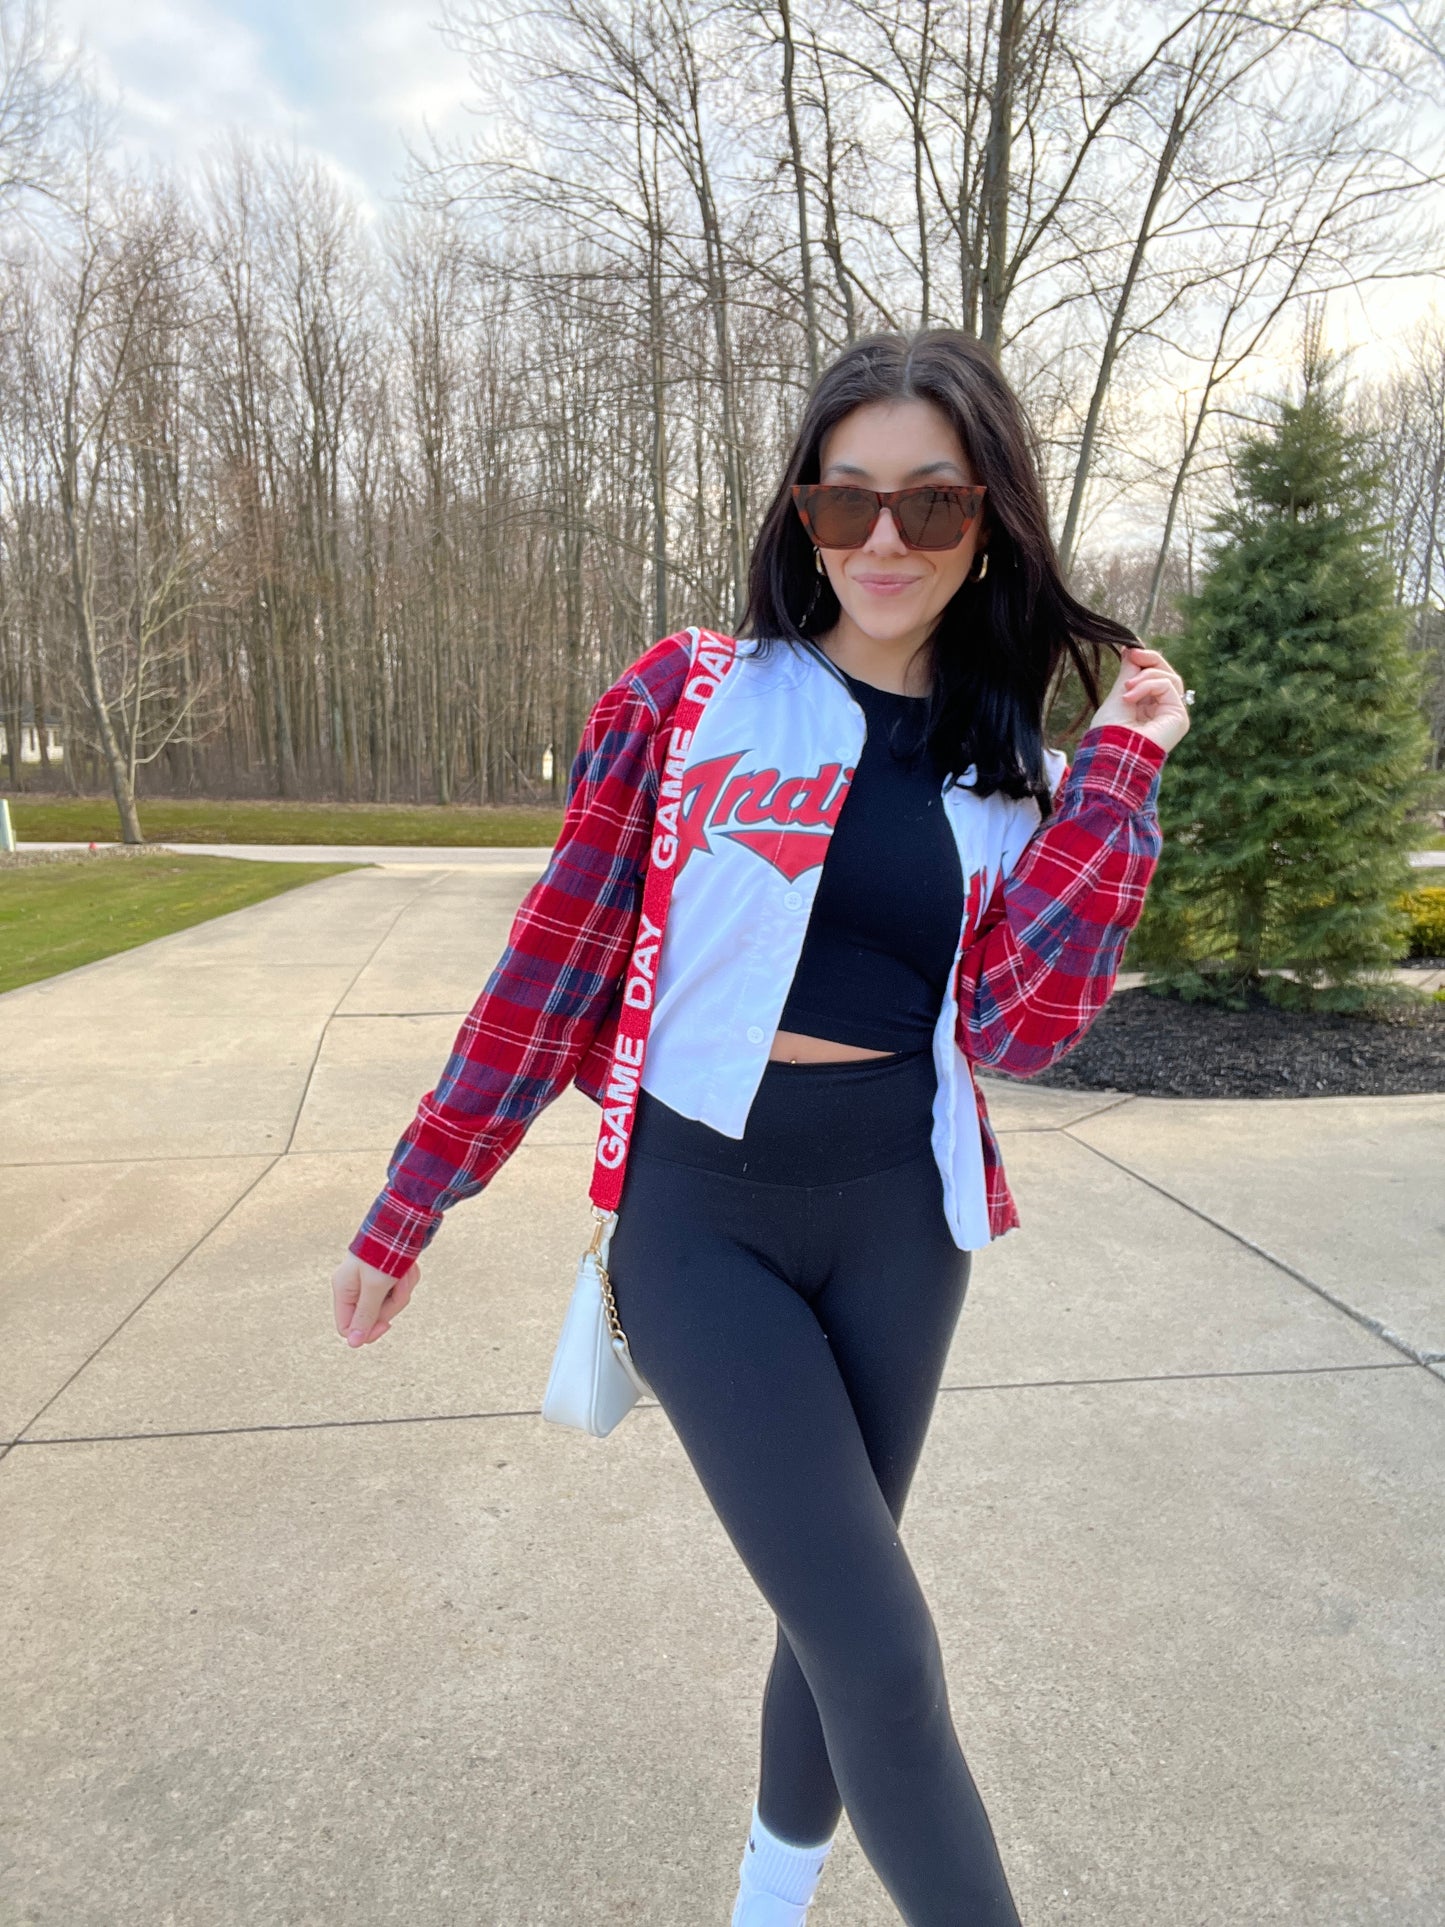 CLEVELAND BASEBALL REYES CROPPED JERSEY X FLANNEL